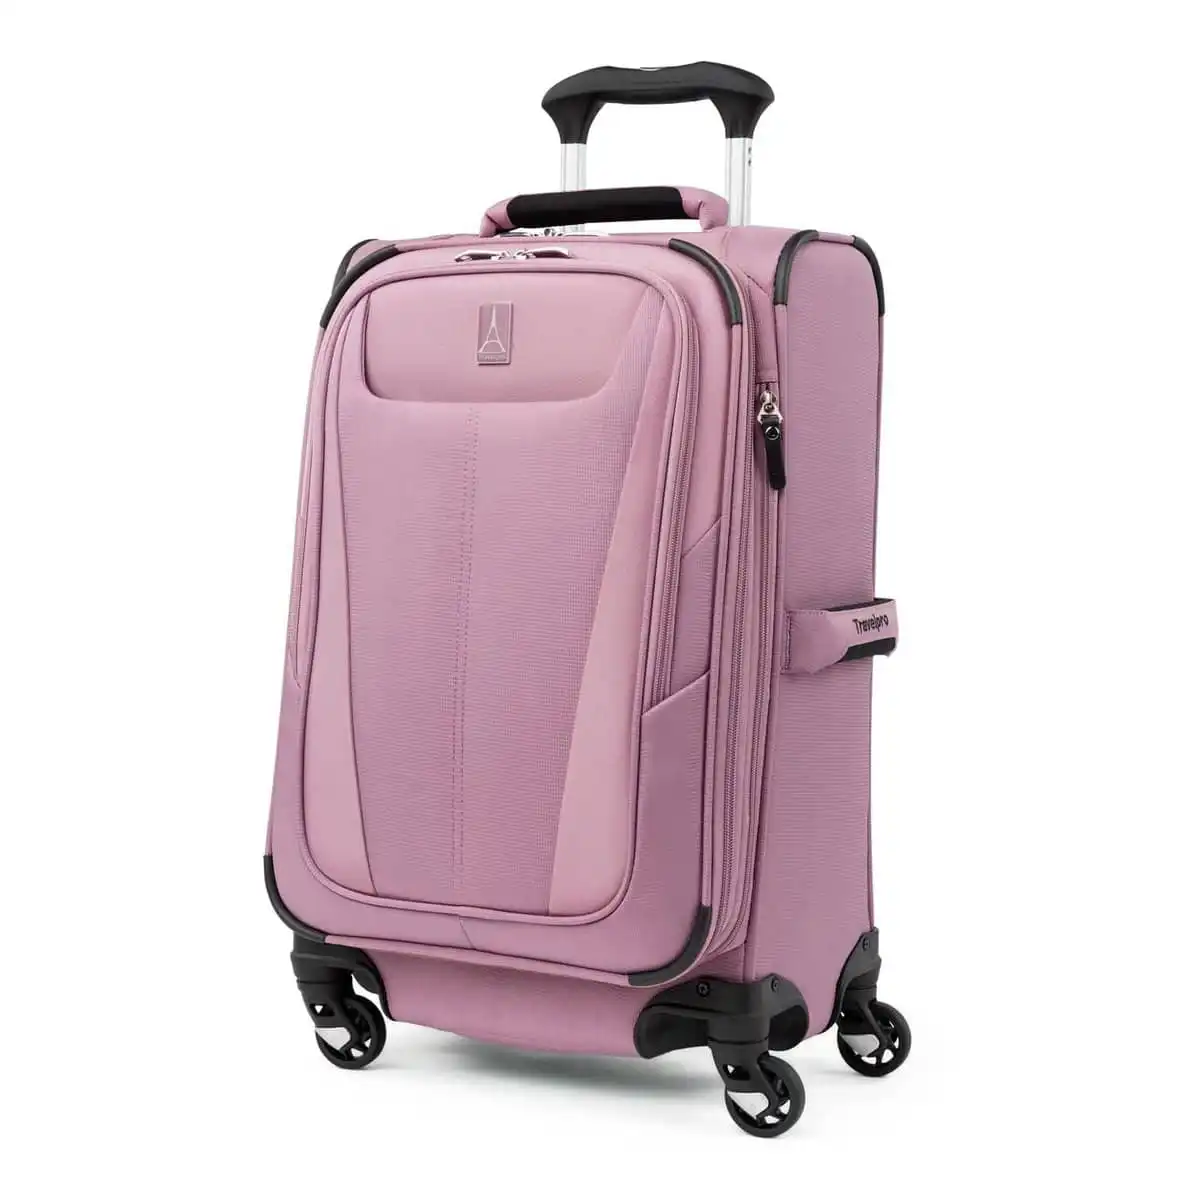 Travelpro Maxlite 5 21" Carry-On Spinner Luggage